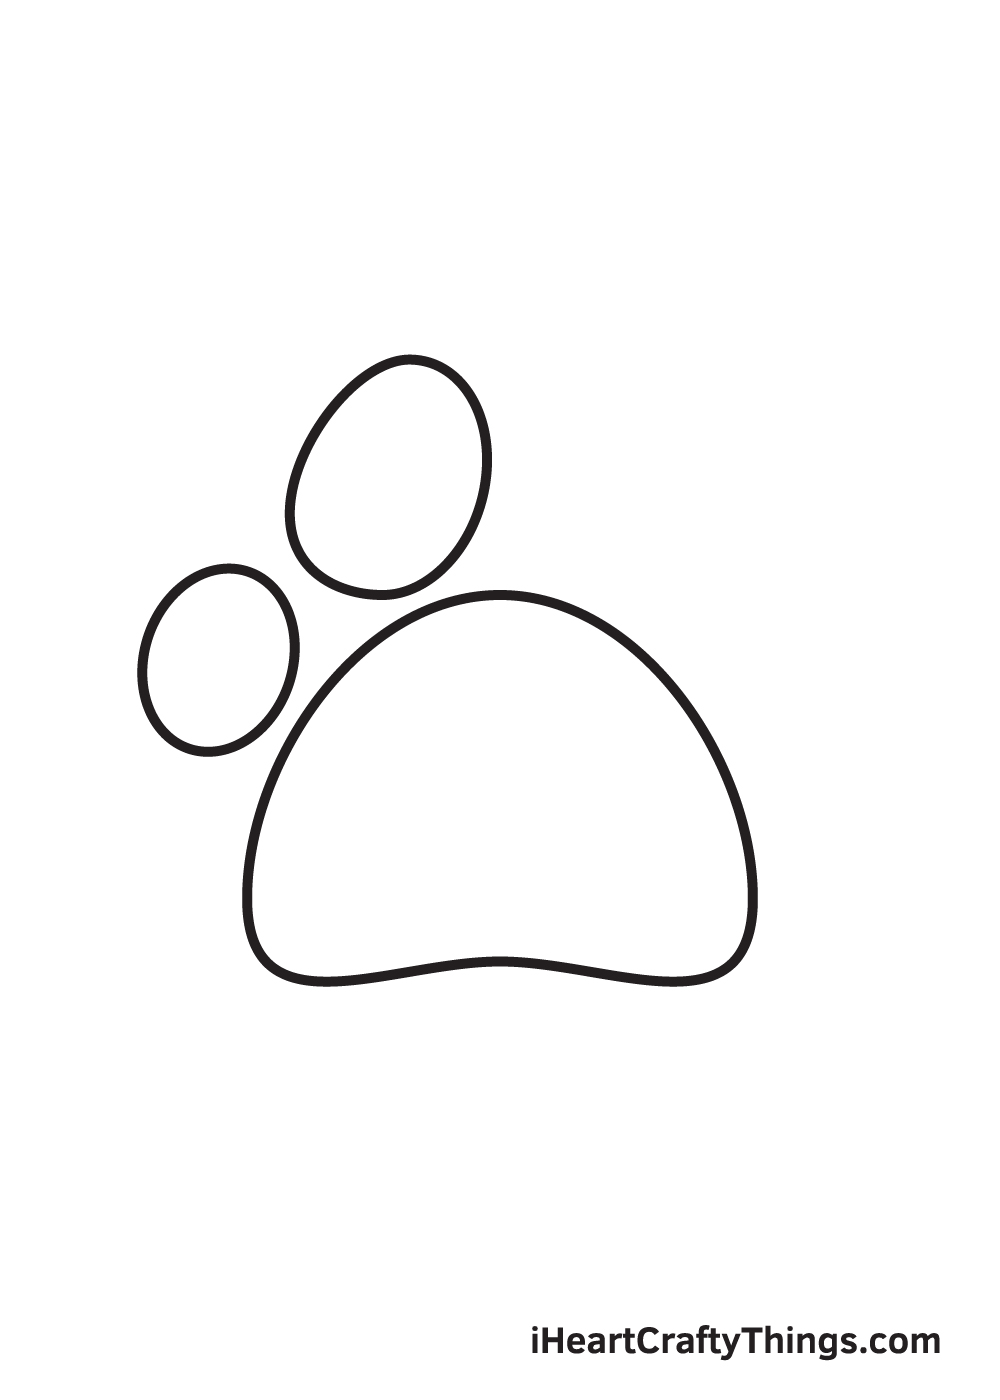 Paw Print Drawing - How To Draw A Paw Print Step By Step